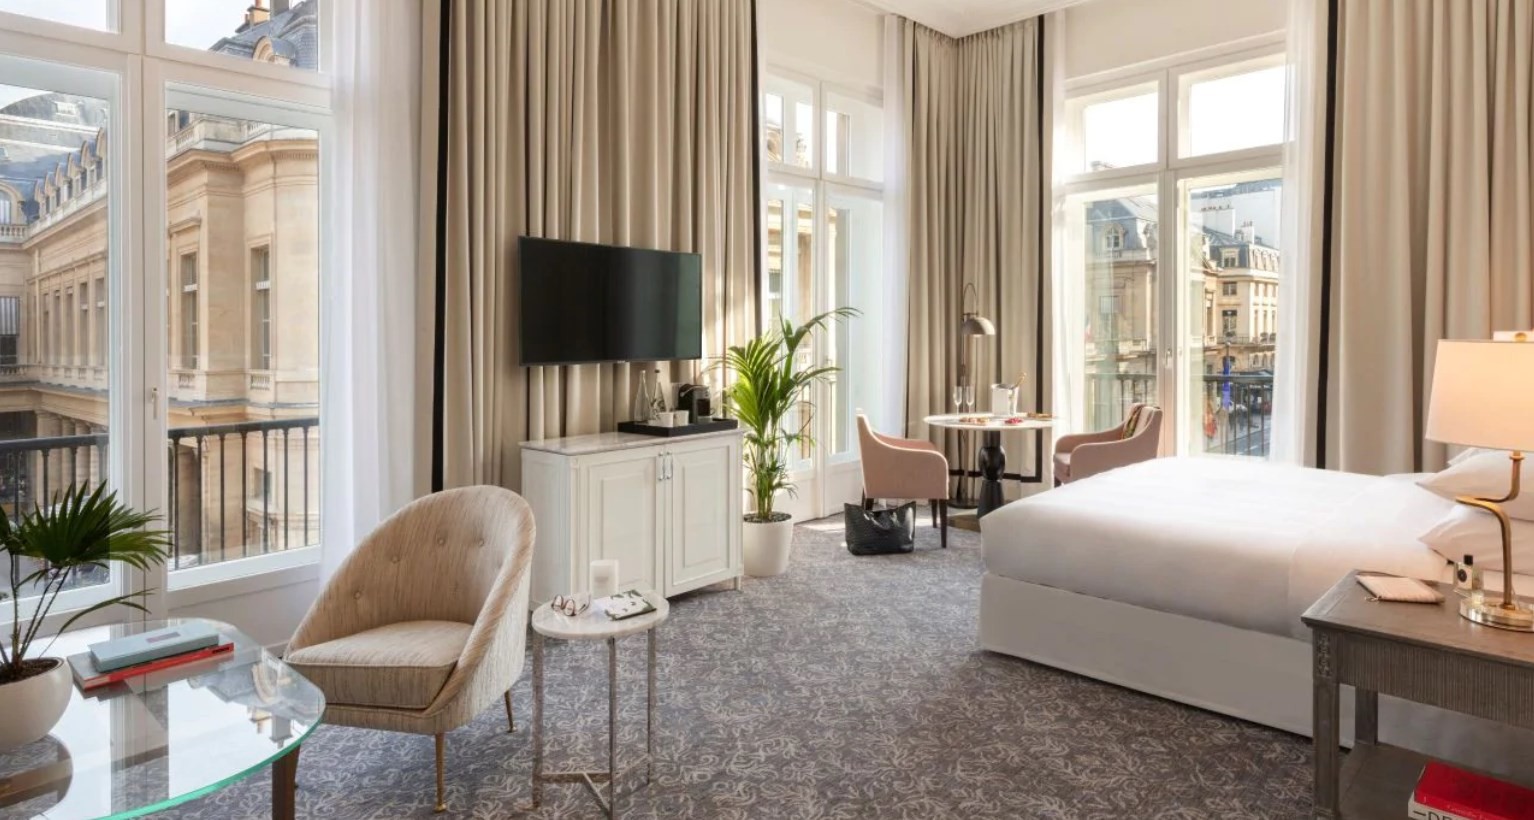 news-main-hotel-du-louvre-in-paris-reopens-following-a-complete-renovation.1559905580.jpg